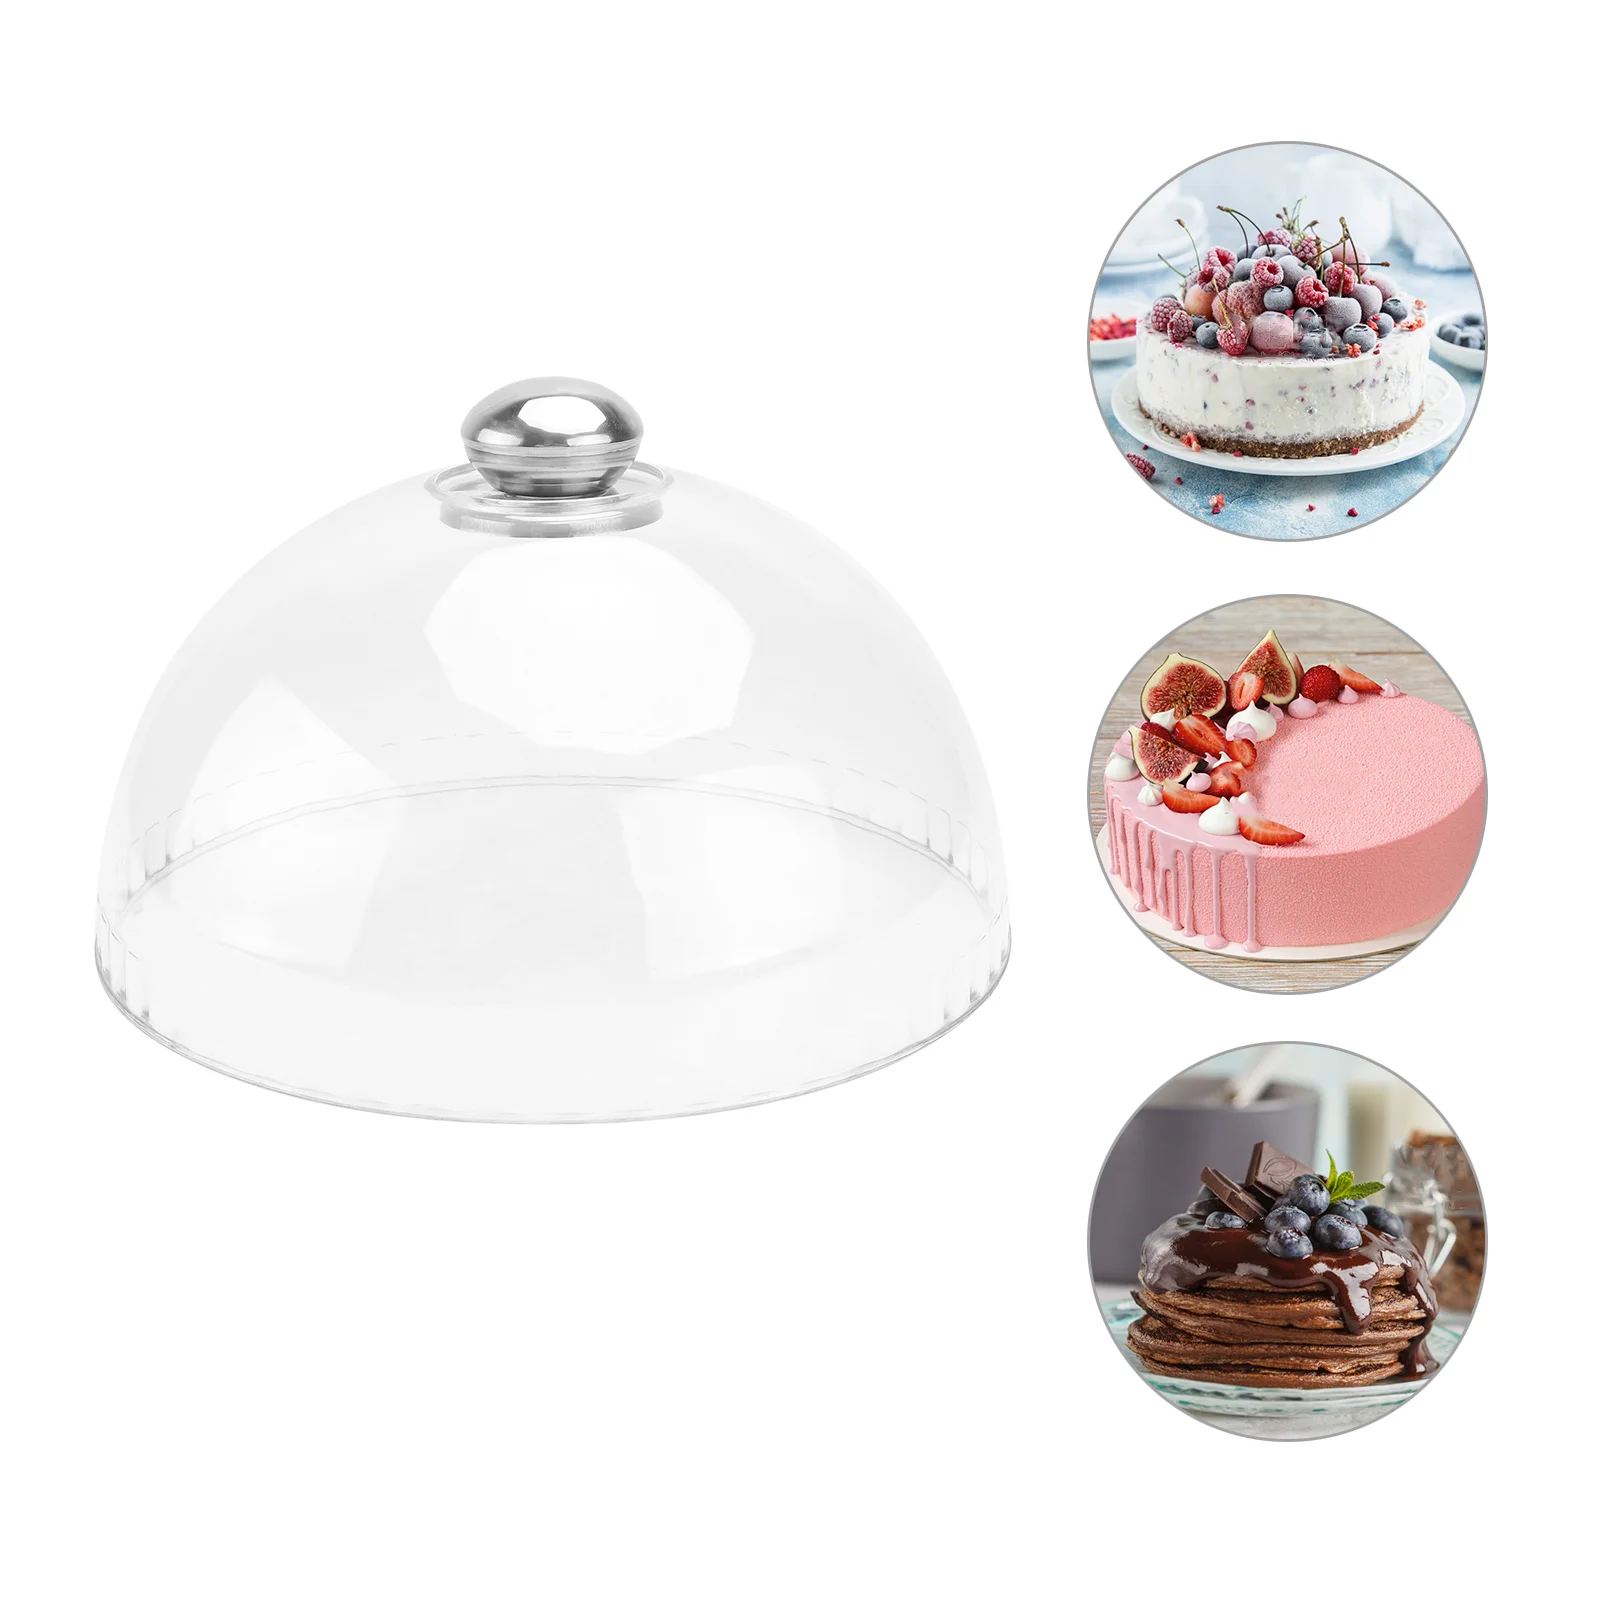 

Cover Dome Cakedisplay Dessert Stand Tent Cloche Plate Picnic Pastry Serving Umbrella Cheese Dish Microwave Acrylic Domes